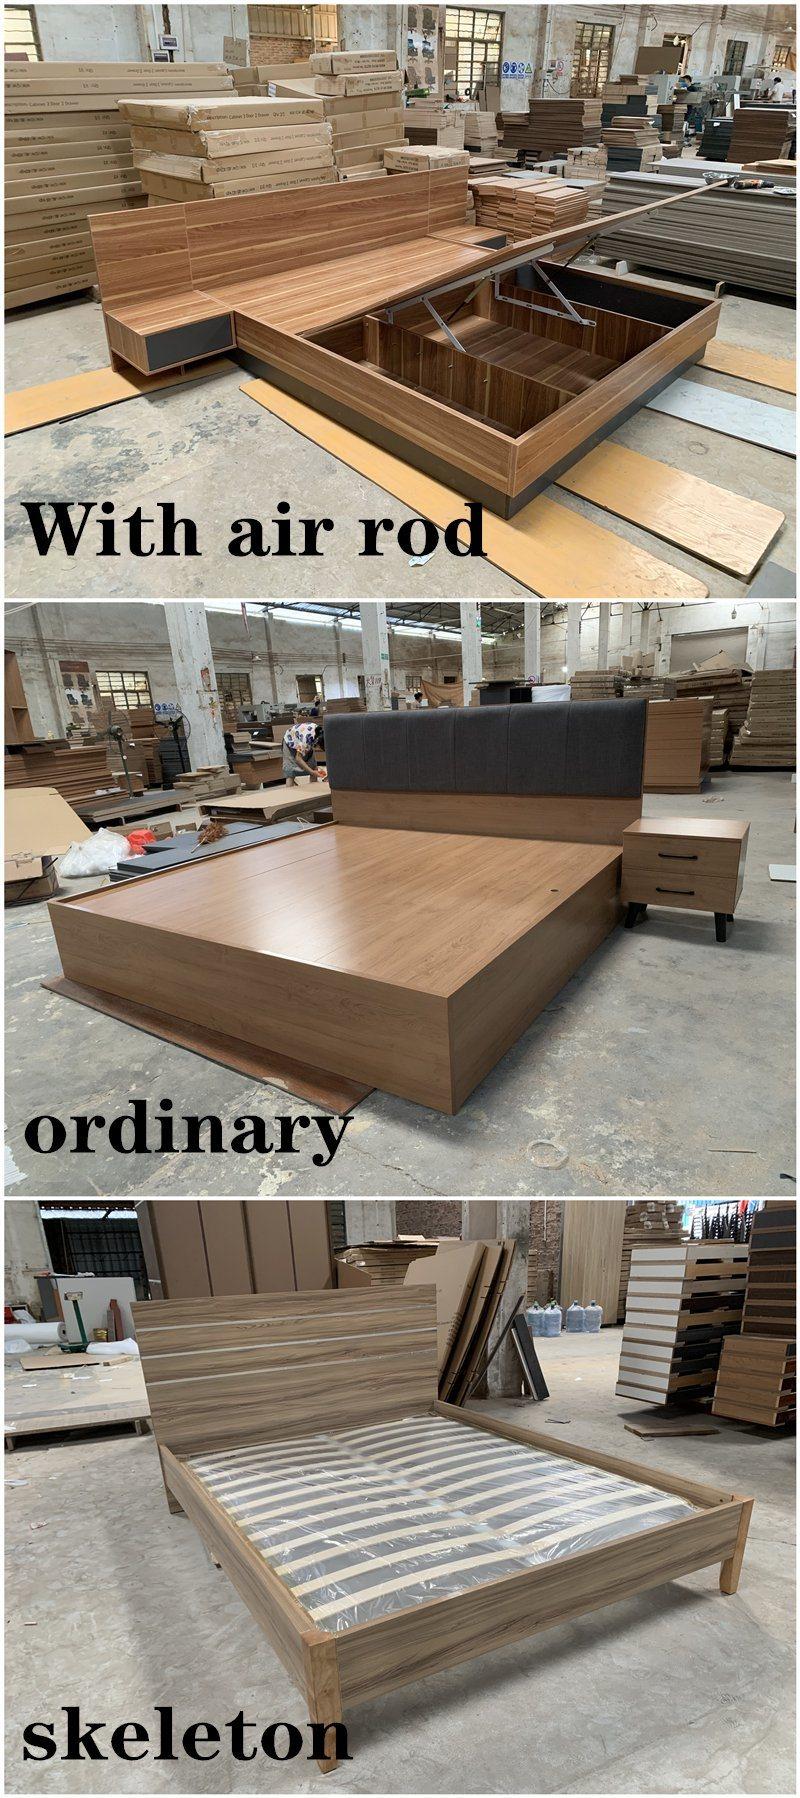 China Wholesale Factory Modern Hotel Wooden Bedroom Furniture Set Mattress Sofa Double King Wall Bed